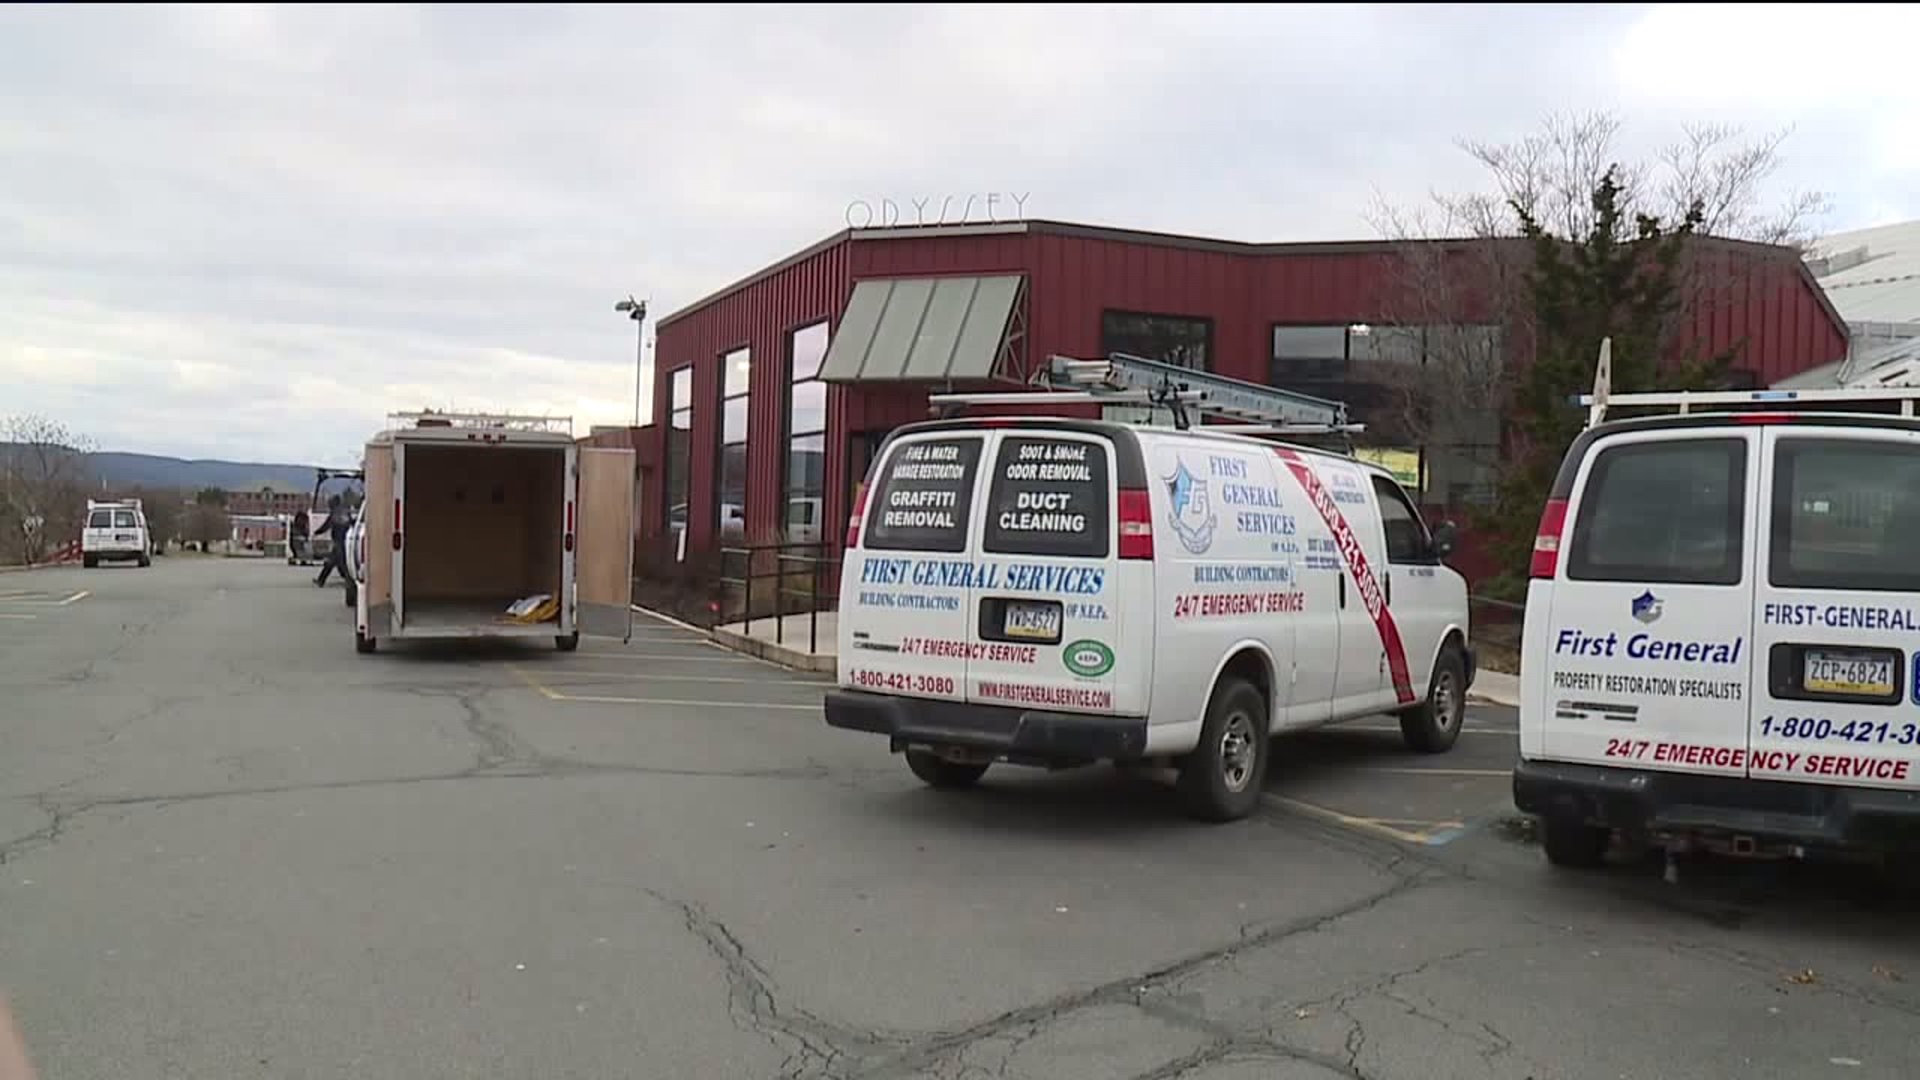 Fitness Center Reopening After Fire in Wilkes-Barre